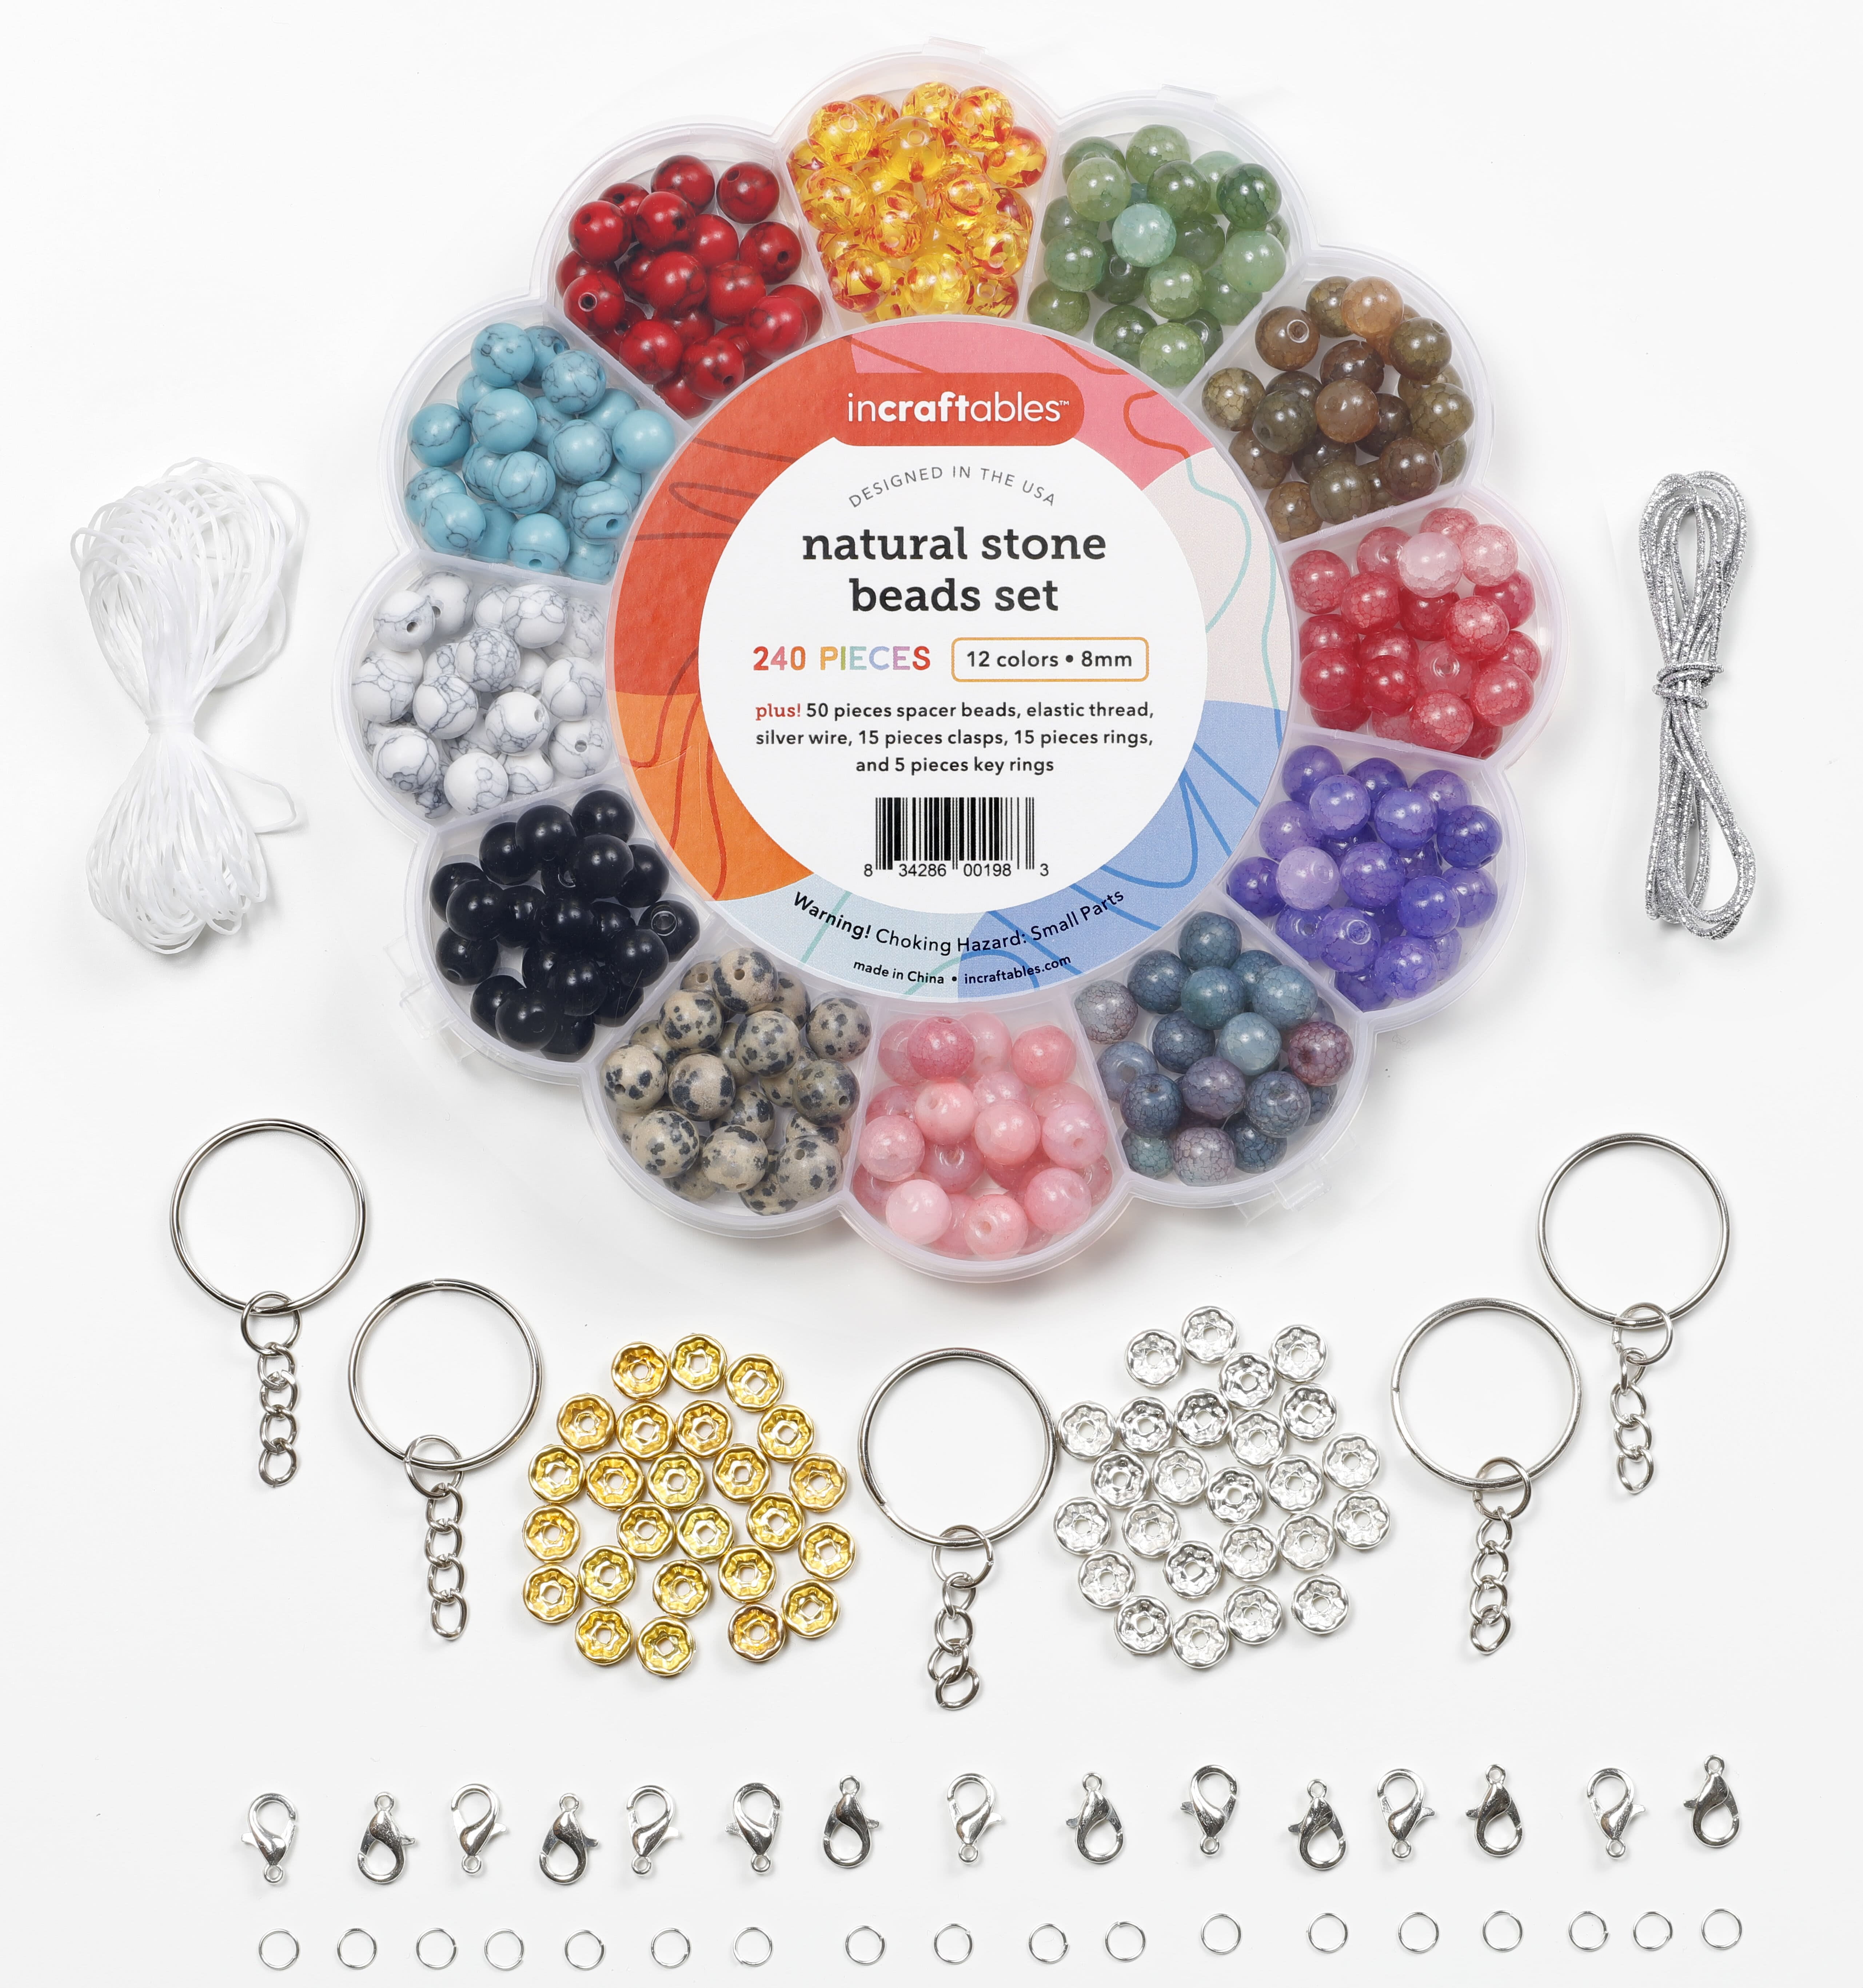 HI-US Adult Unisex 100g Reusable Moldable Plastic Thermoplastic Beads For  DIY Crafts Sculpting 